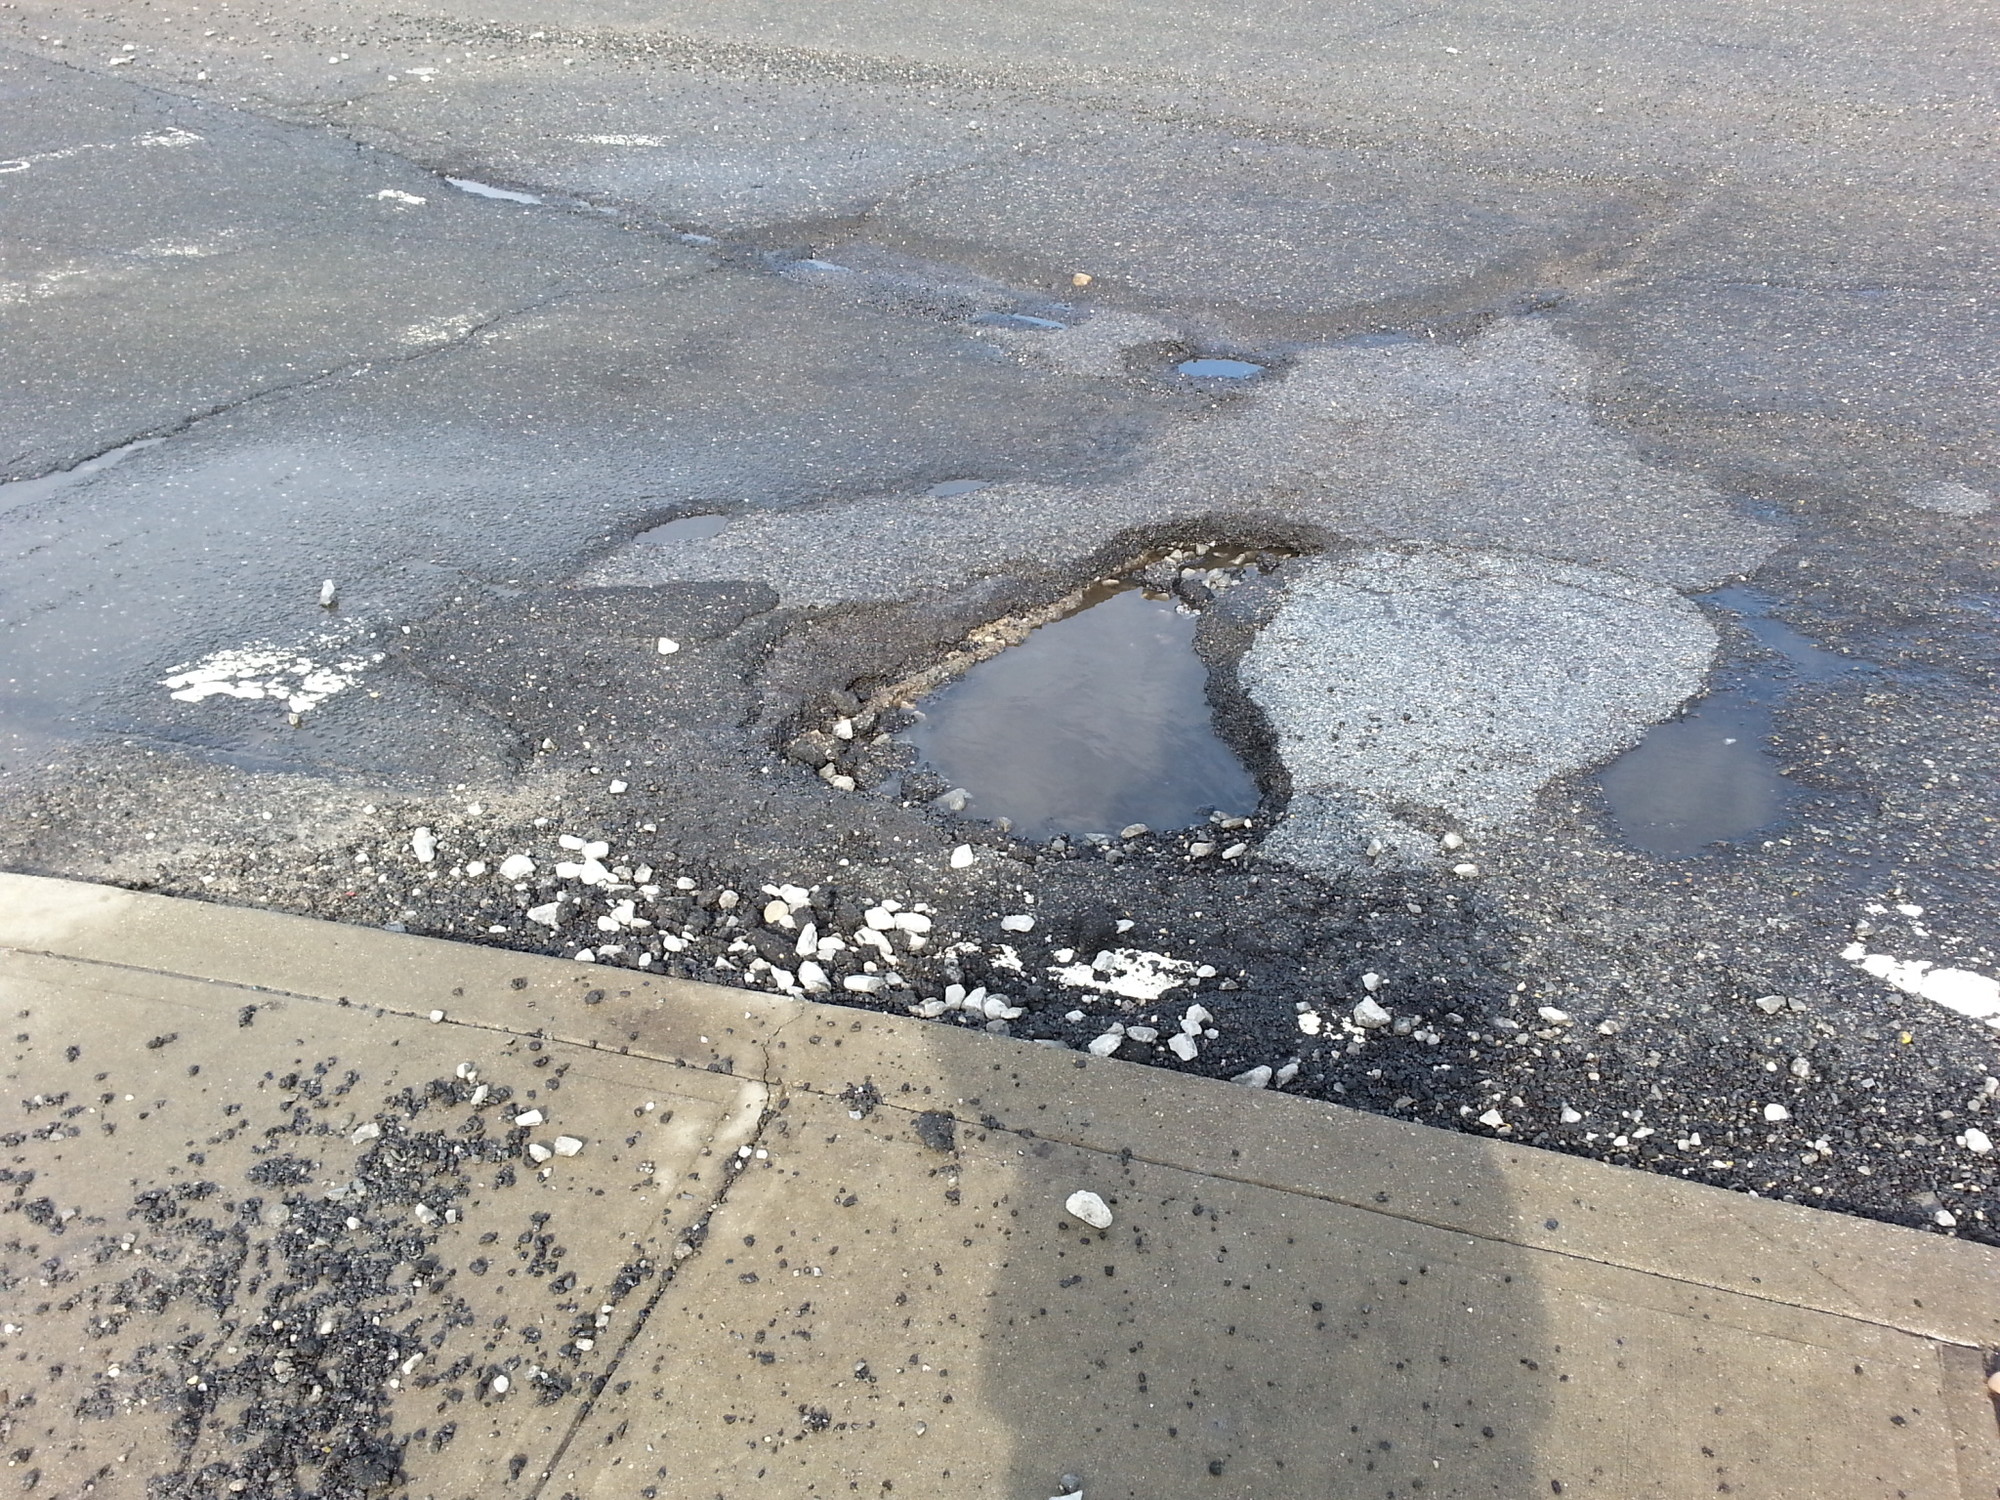 An example of a deep pothole, at the corner of Long Beach Road and Mott Street in Oceanside.